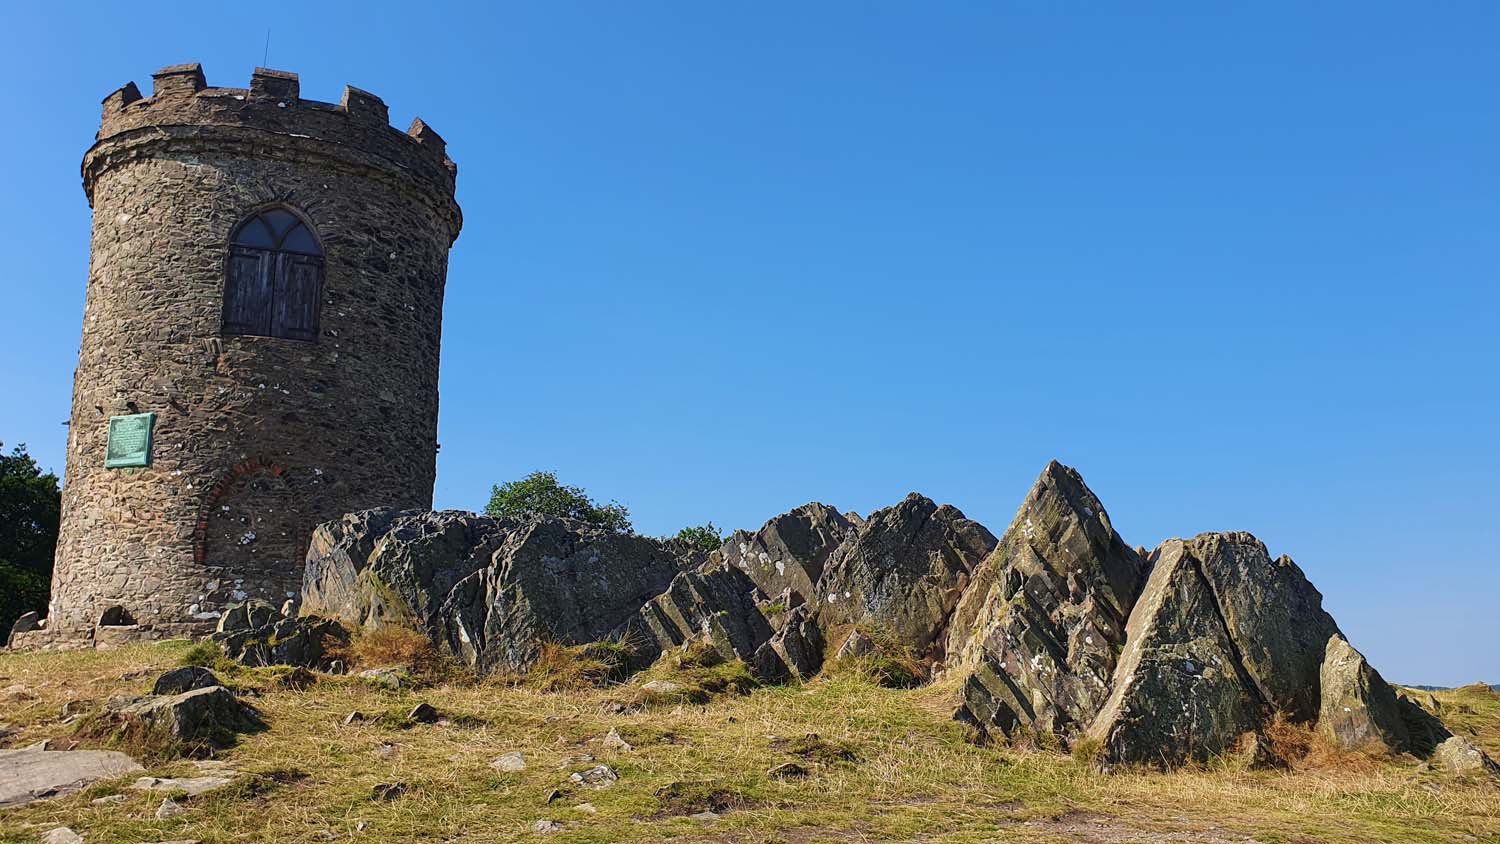 Rocky crags at Bradgate Park, next to the Old John tower.